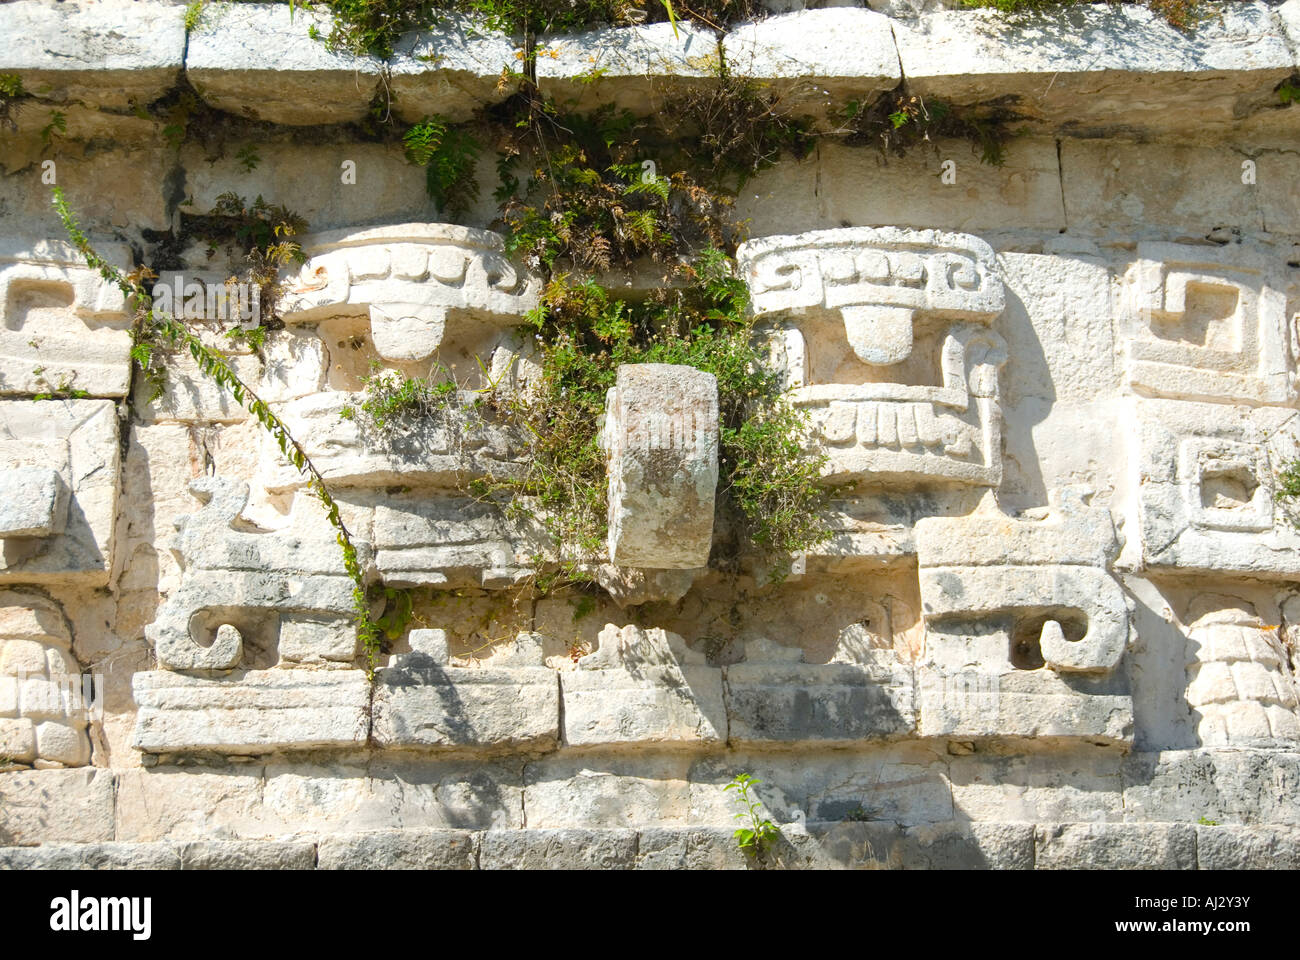 Decorative Carved Head of Chaac Rain God and Comic Big Nose The Nunnery Monjas Building Chichen Itza Yucatan Mexico 2007 NR Stock Photo